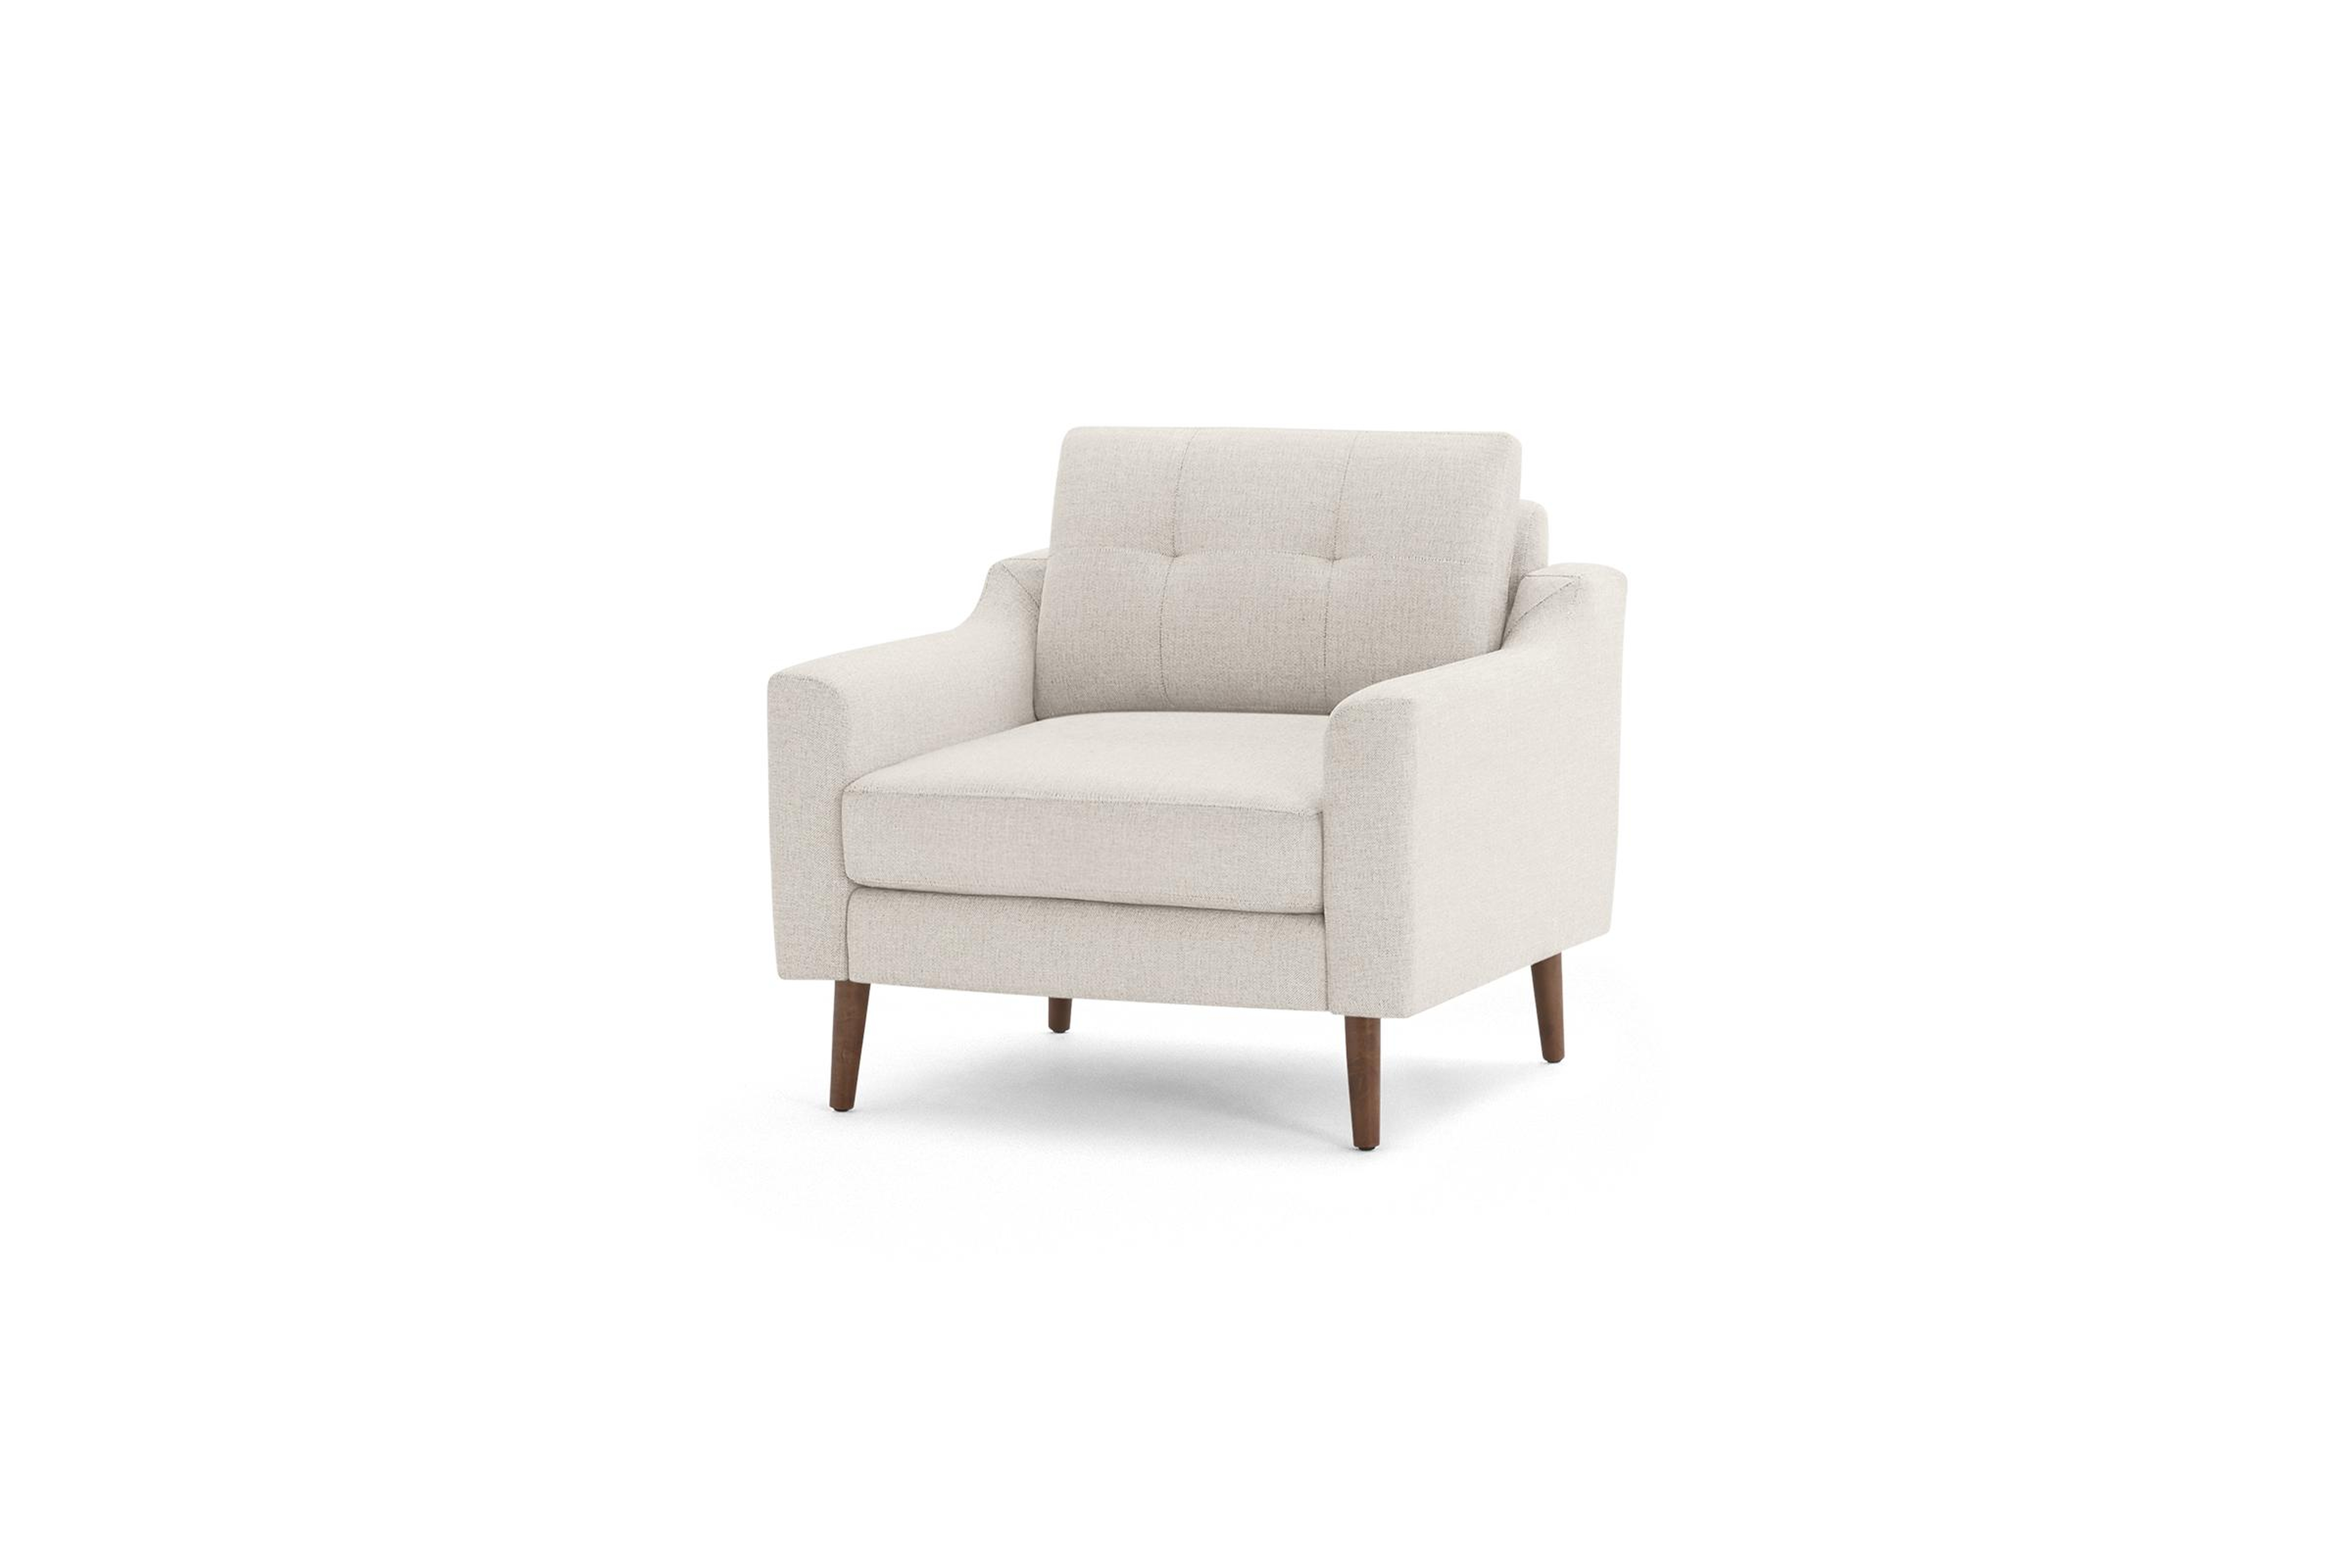 The Slope Nomad Armchair in Ivory, Walnut Legs - Burrow